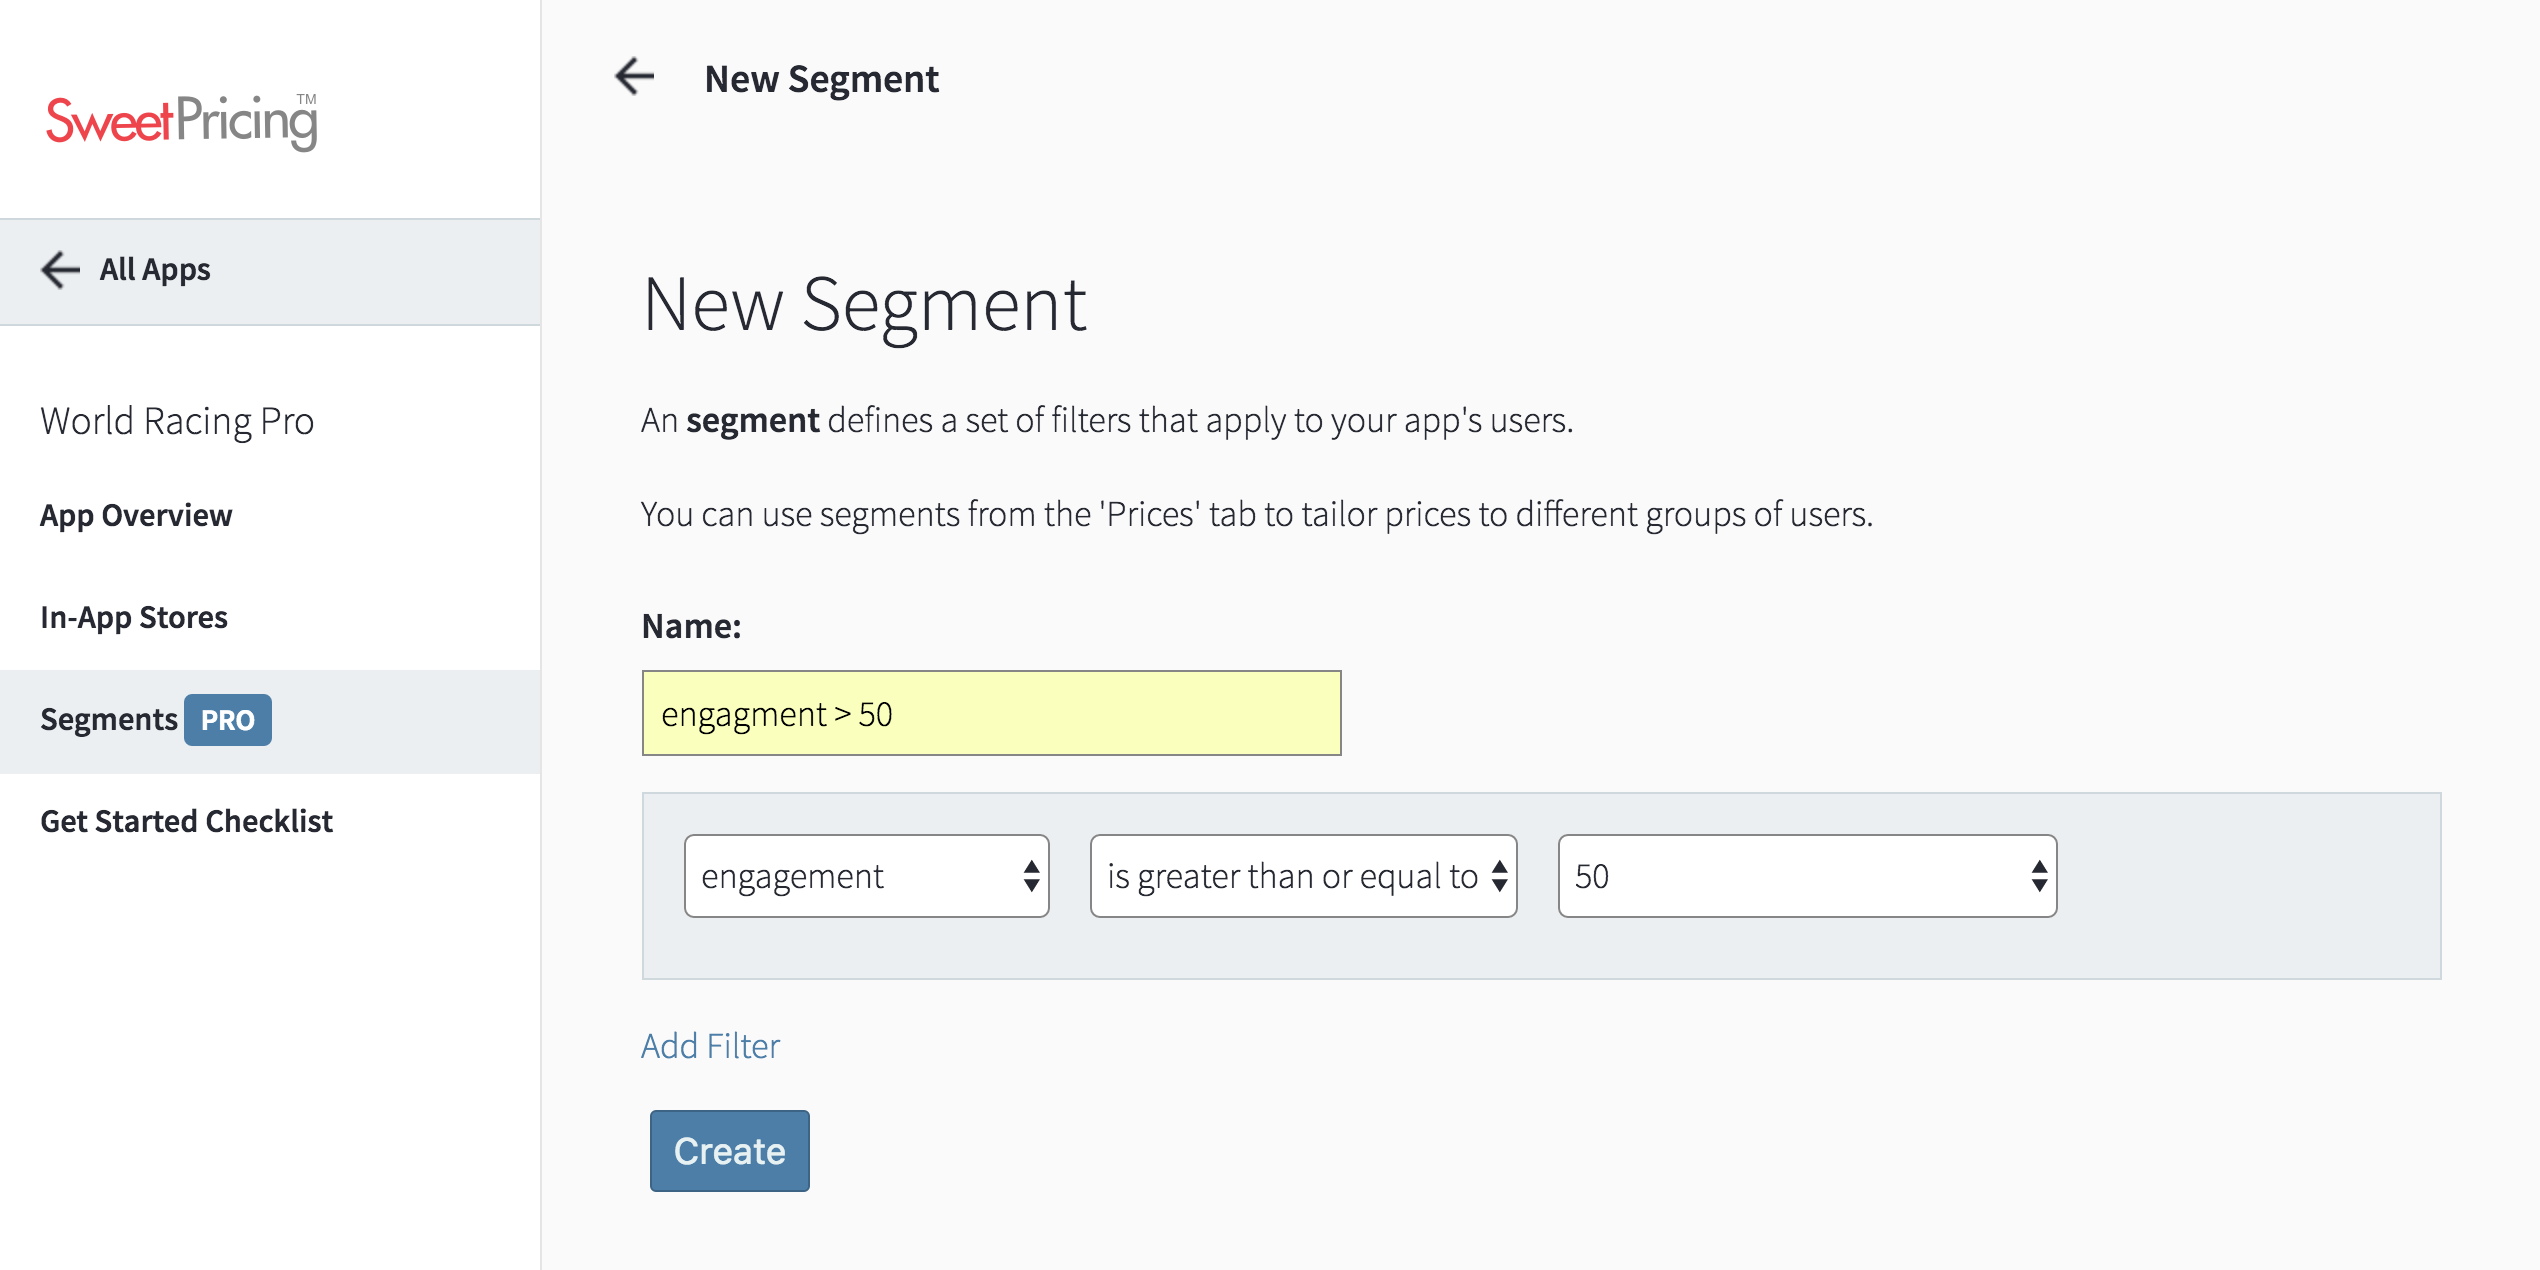 You can create a new user segment from the 'Segments' tab by clicking 'New Segment'.